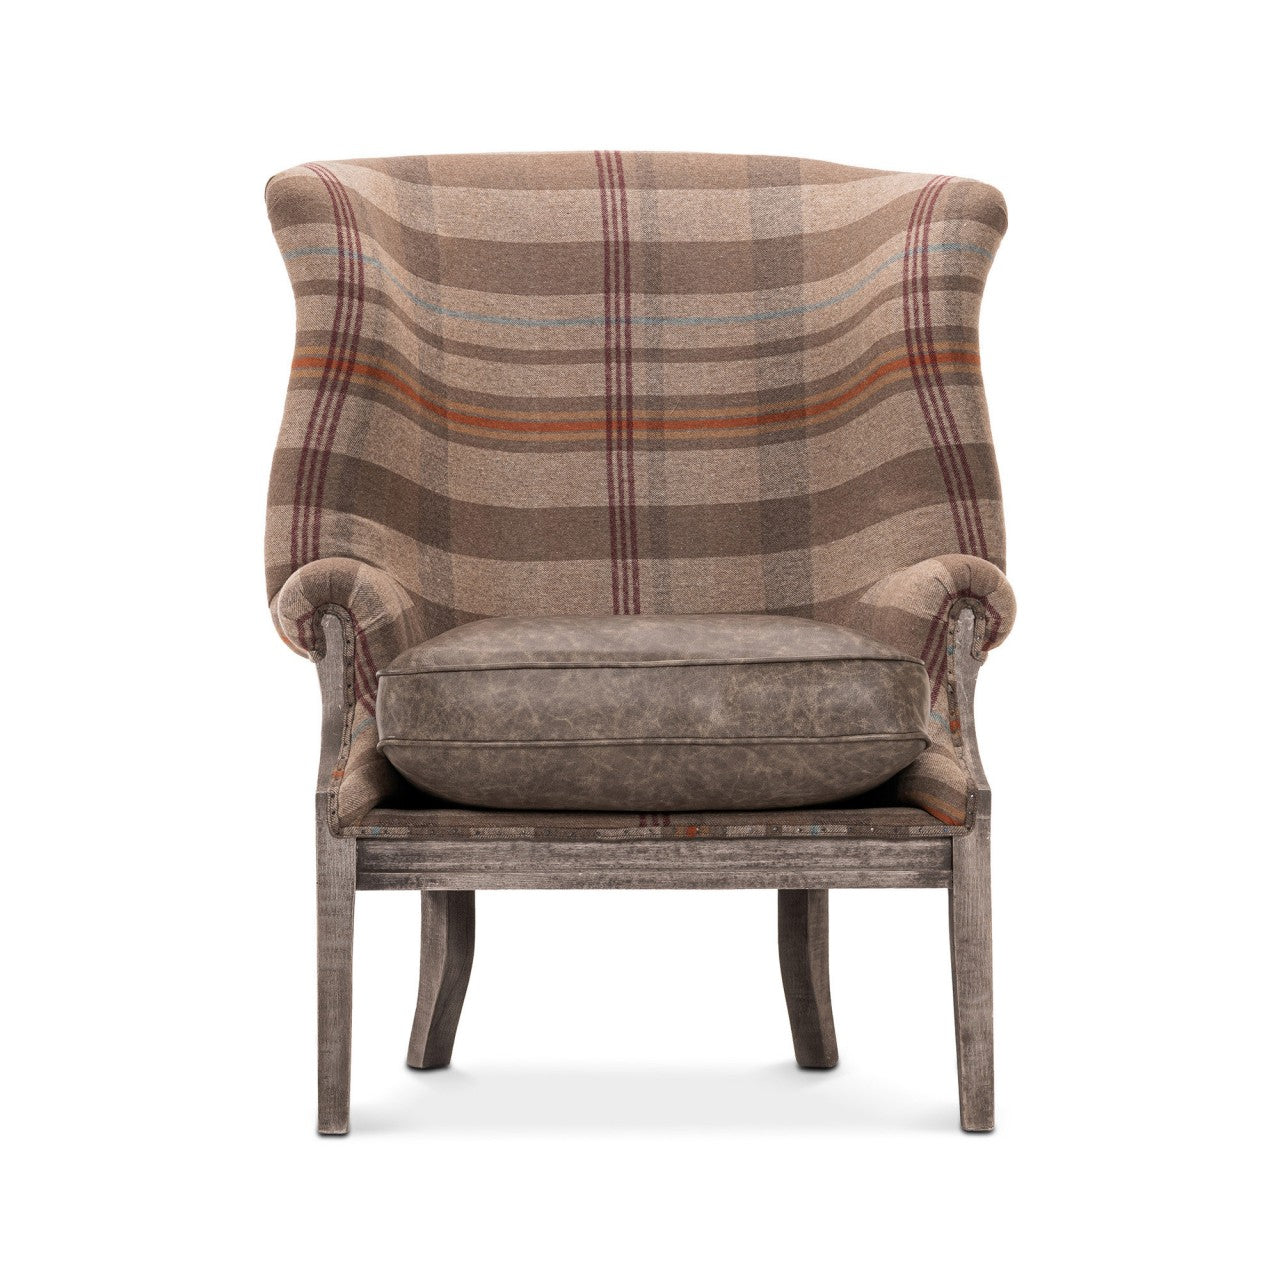 WILLIAM DECONSTRUCTED - CHALET fabric and ANTIQUE GREY leather_Furniture_Mindthegap